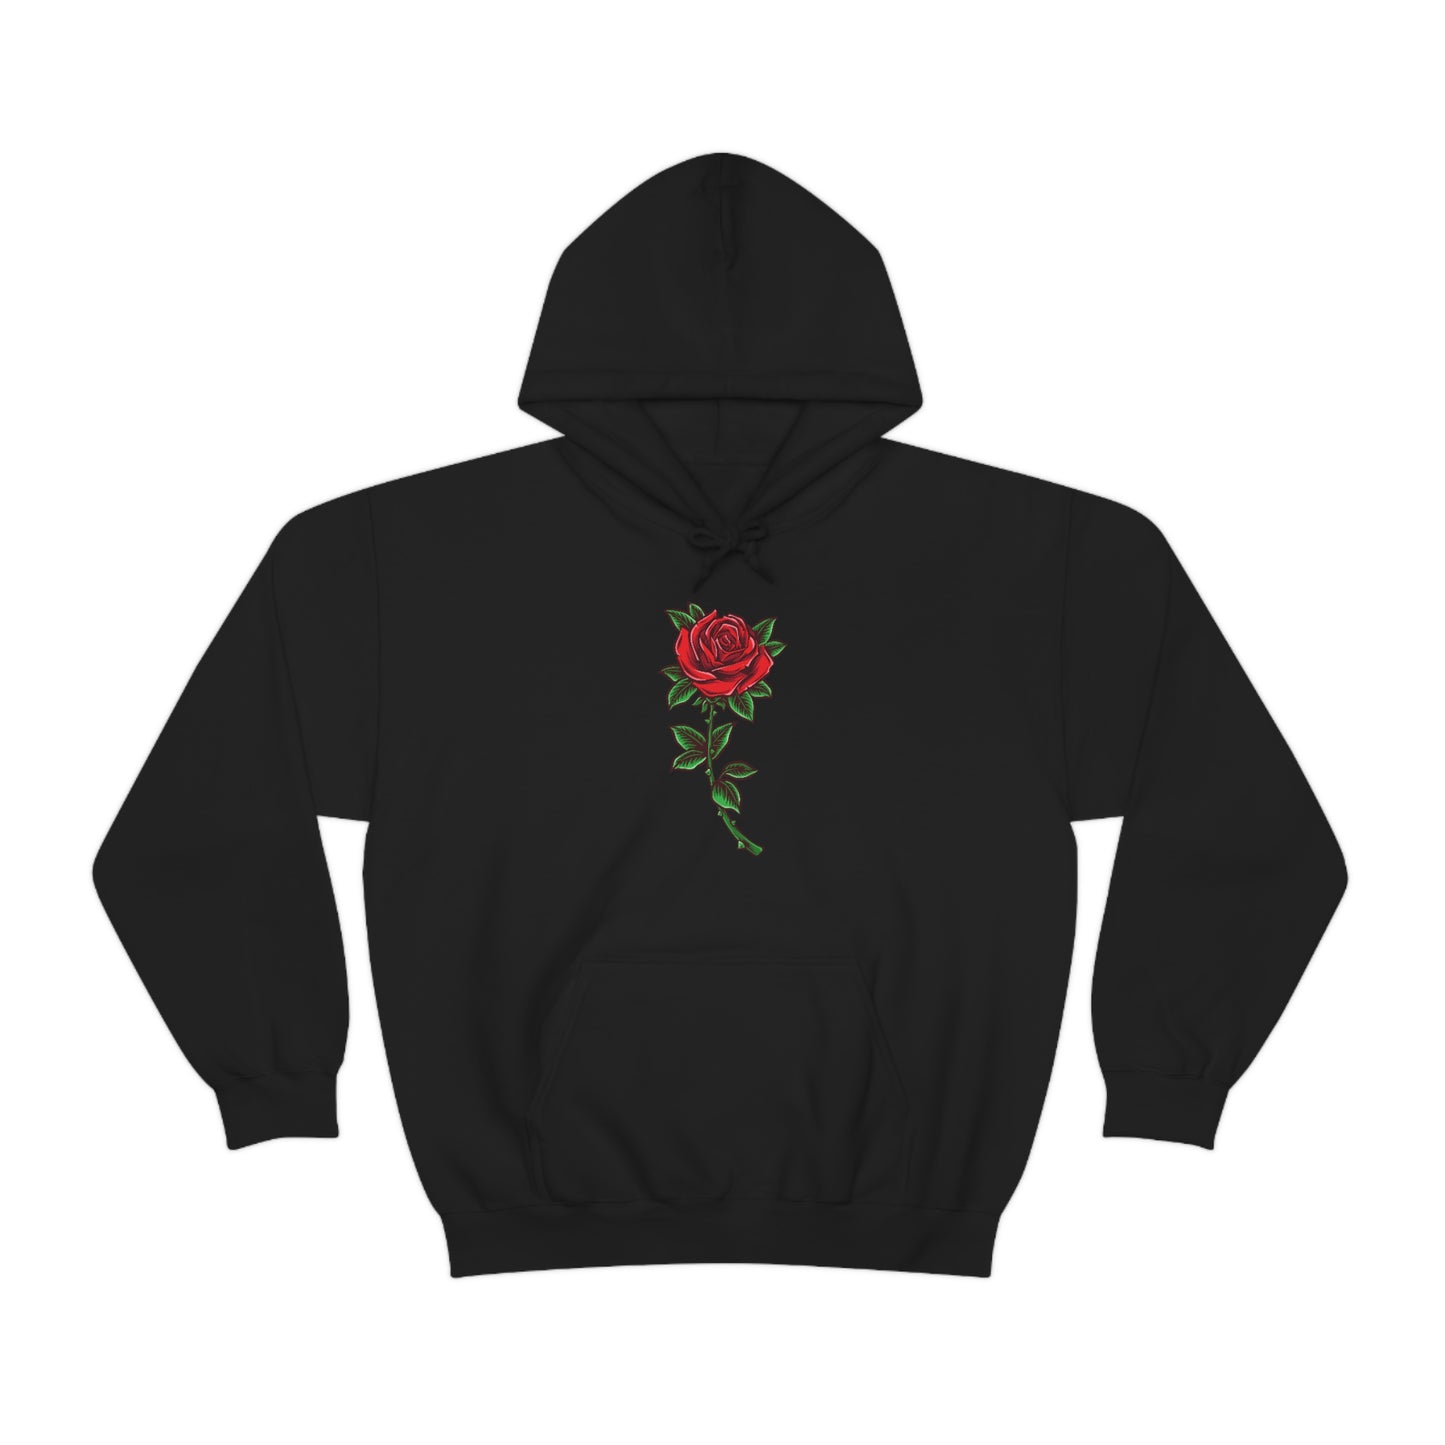 Red Rose Hoodie, Flowers Floral Pullover Men Women Adult Aesthetic Graphic Cotton Punk Goth Hooded Sweatshirt with Pockets